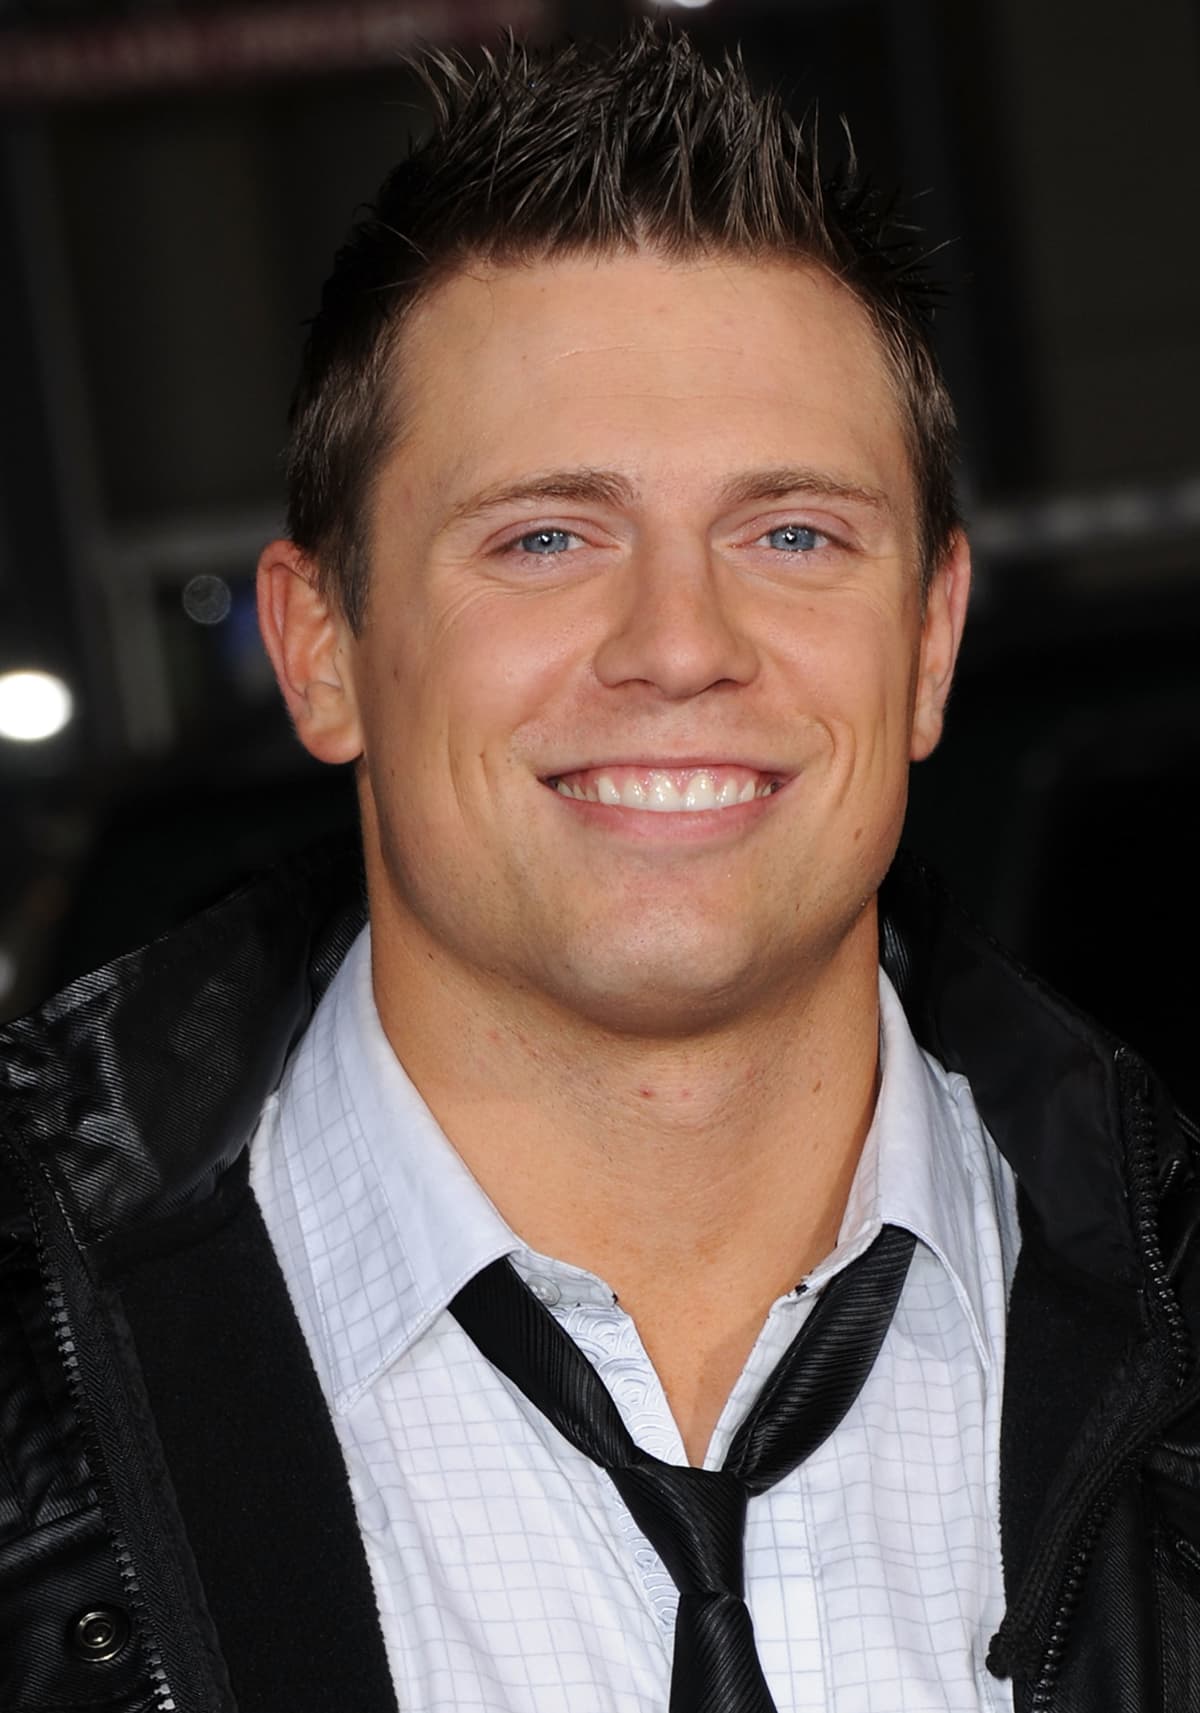 HOLLYWOOD - OCTOBER 13:  WWE Superstar Mike "The Miz" Mizanin arrives at the Los Angeles Premiere "Jackass 3D" at Grauman's Chinese Theatre on October 13, 2010 in Hollywood, California.  (Photo by Jon Kopaloff/FilmMagic)